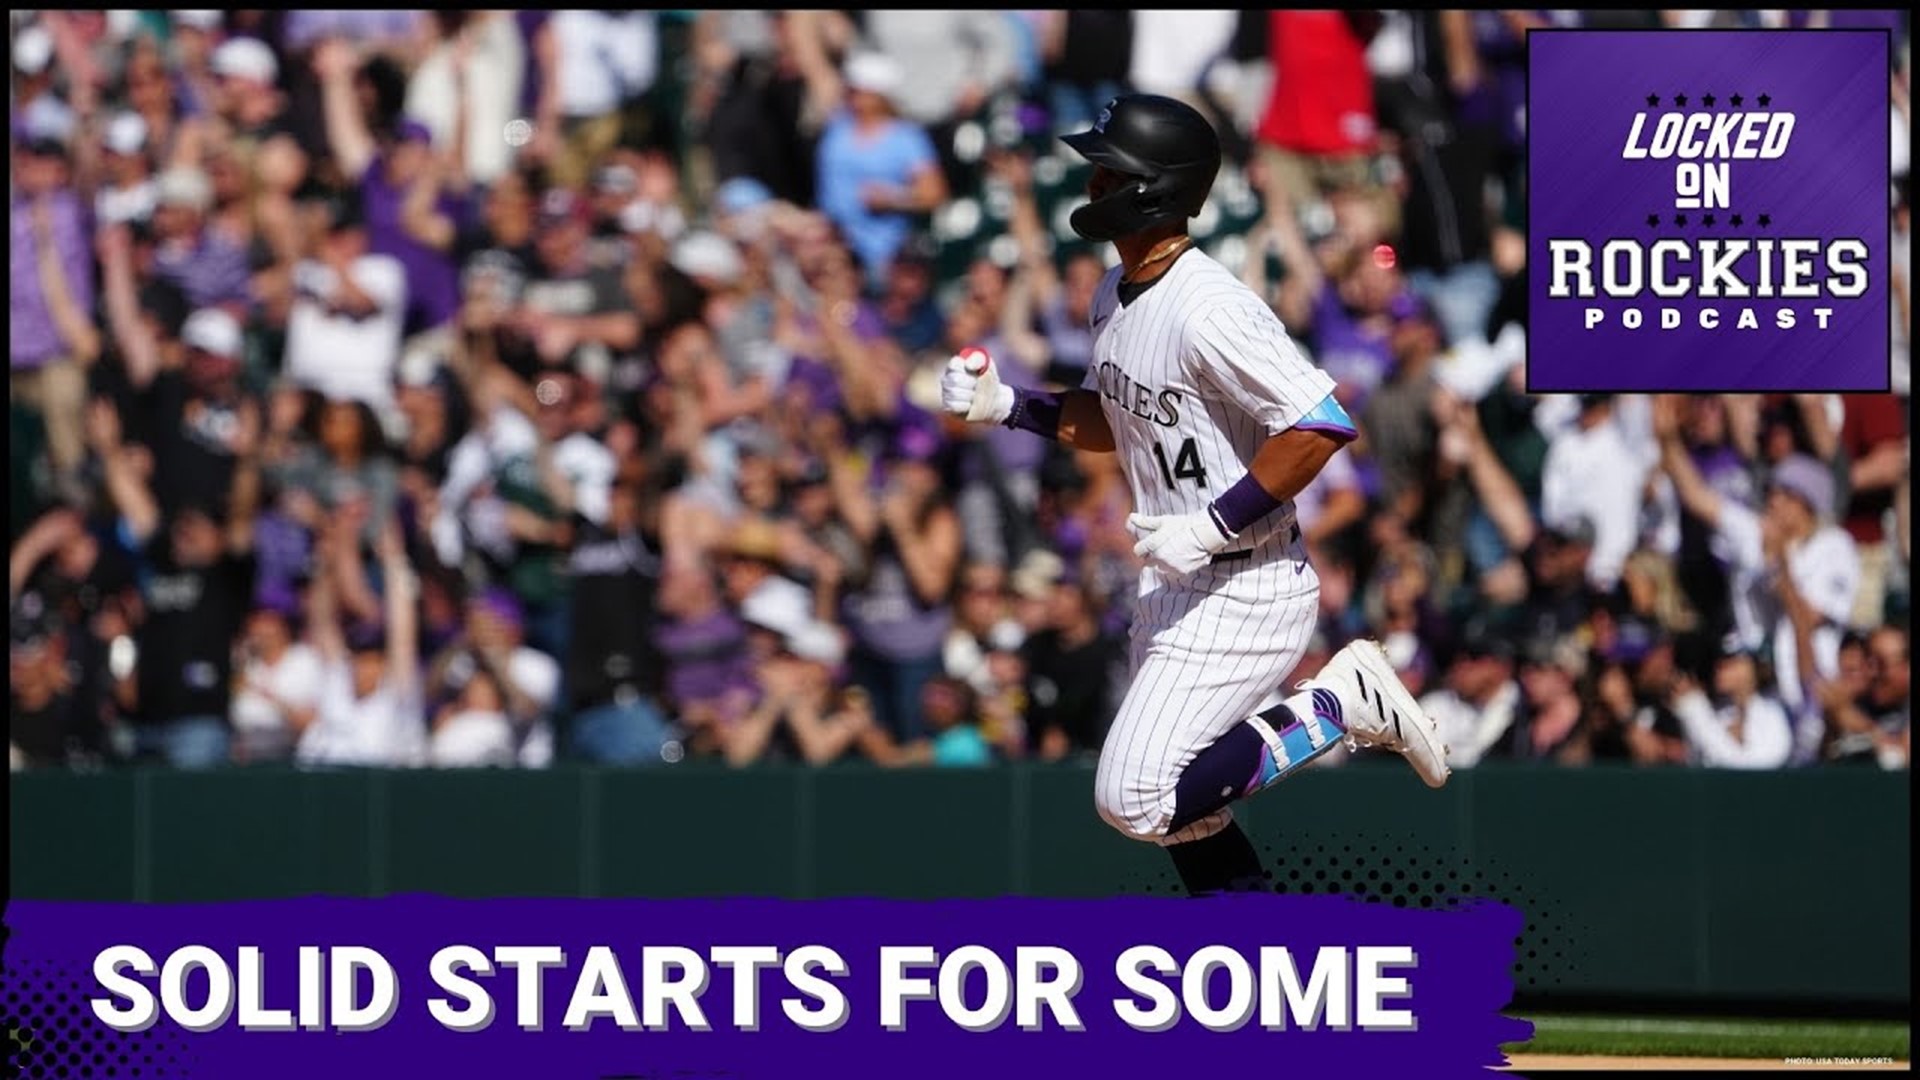 The record for the Rockies isn't great, but there are players who are contributing to this team and are showing some positive signs.